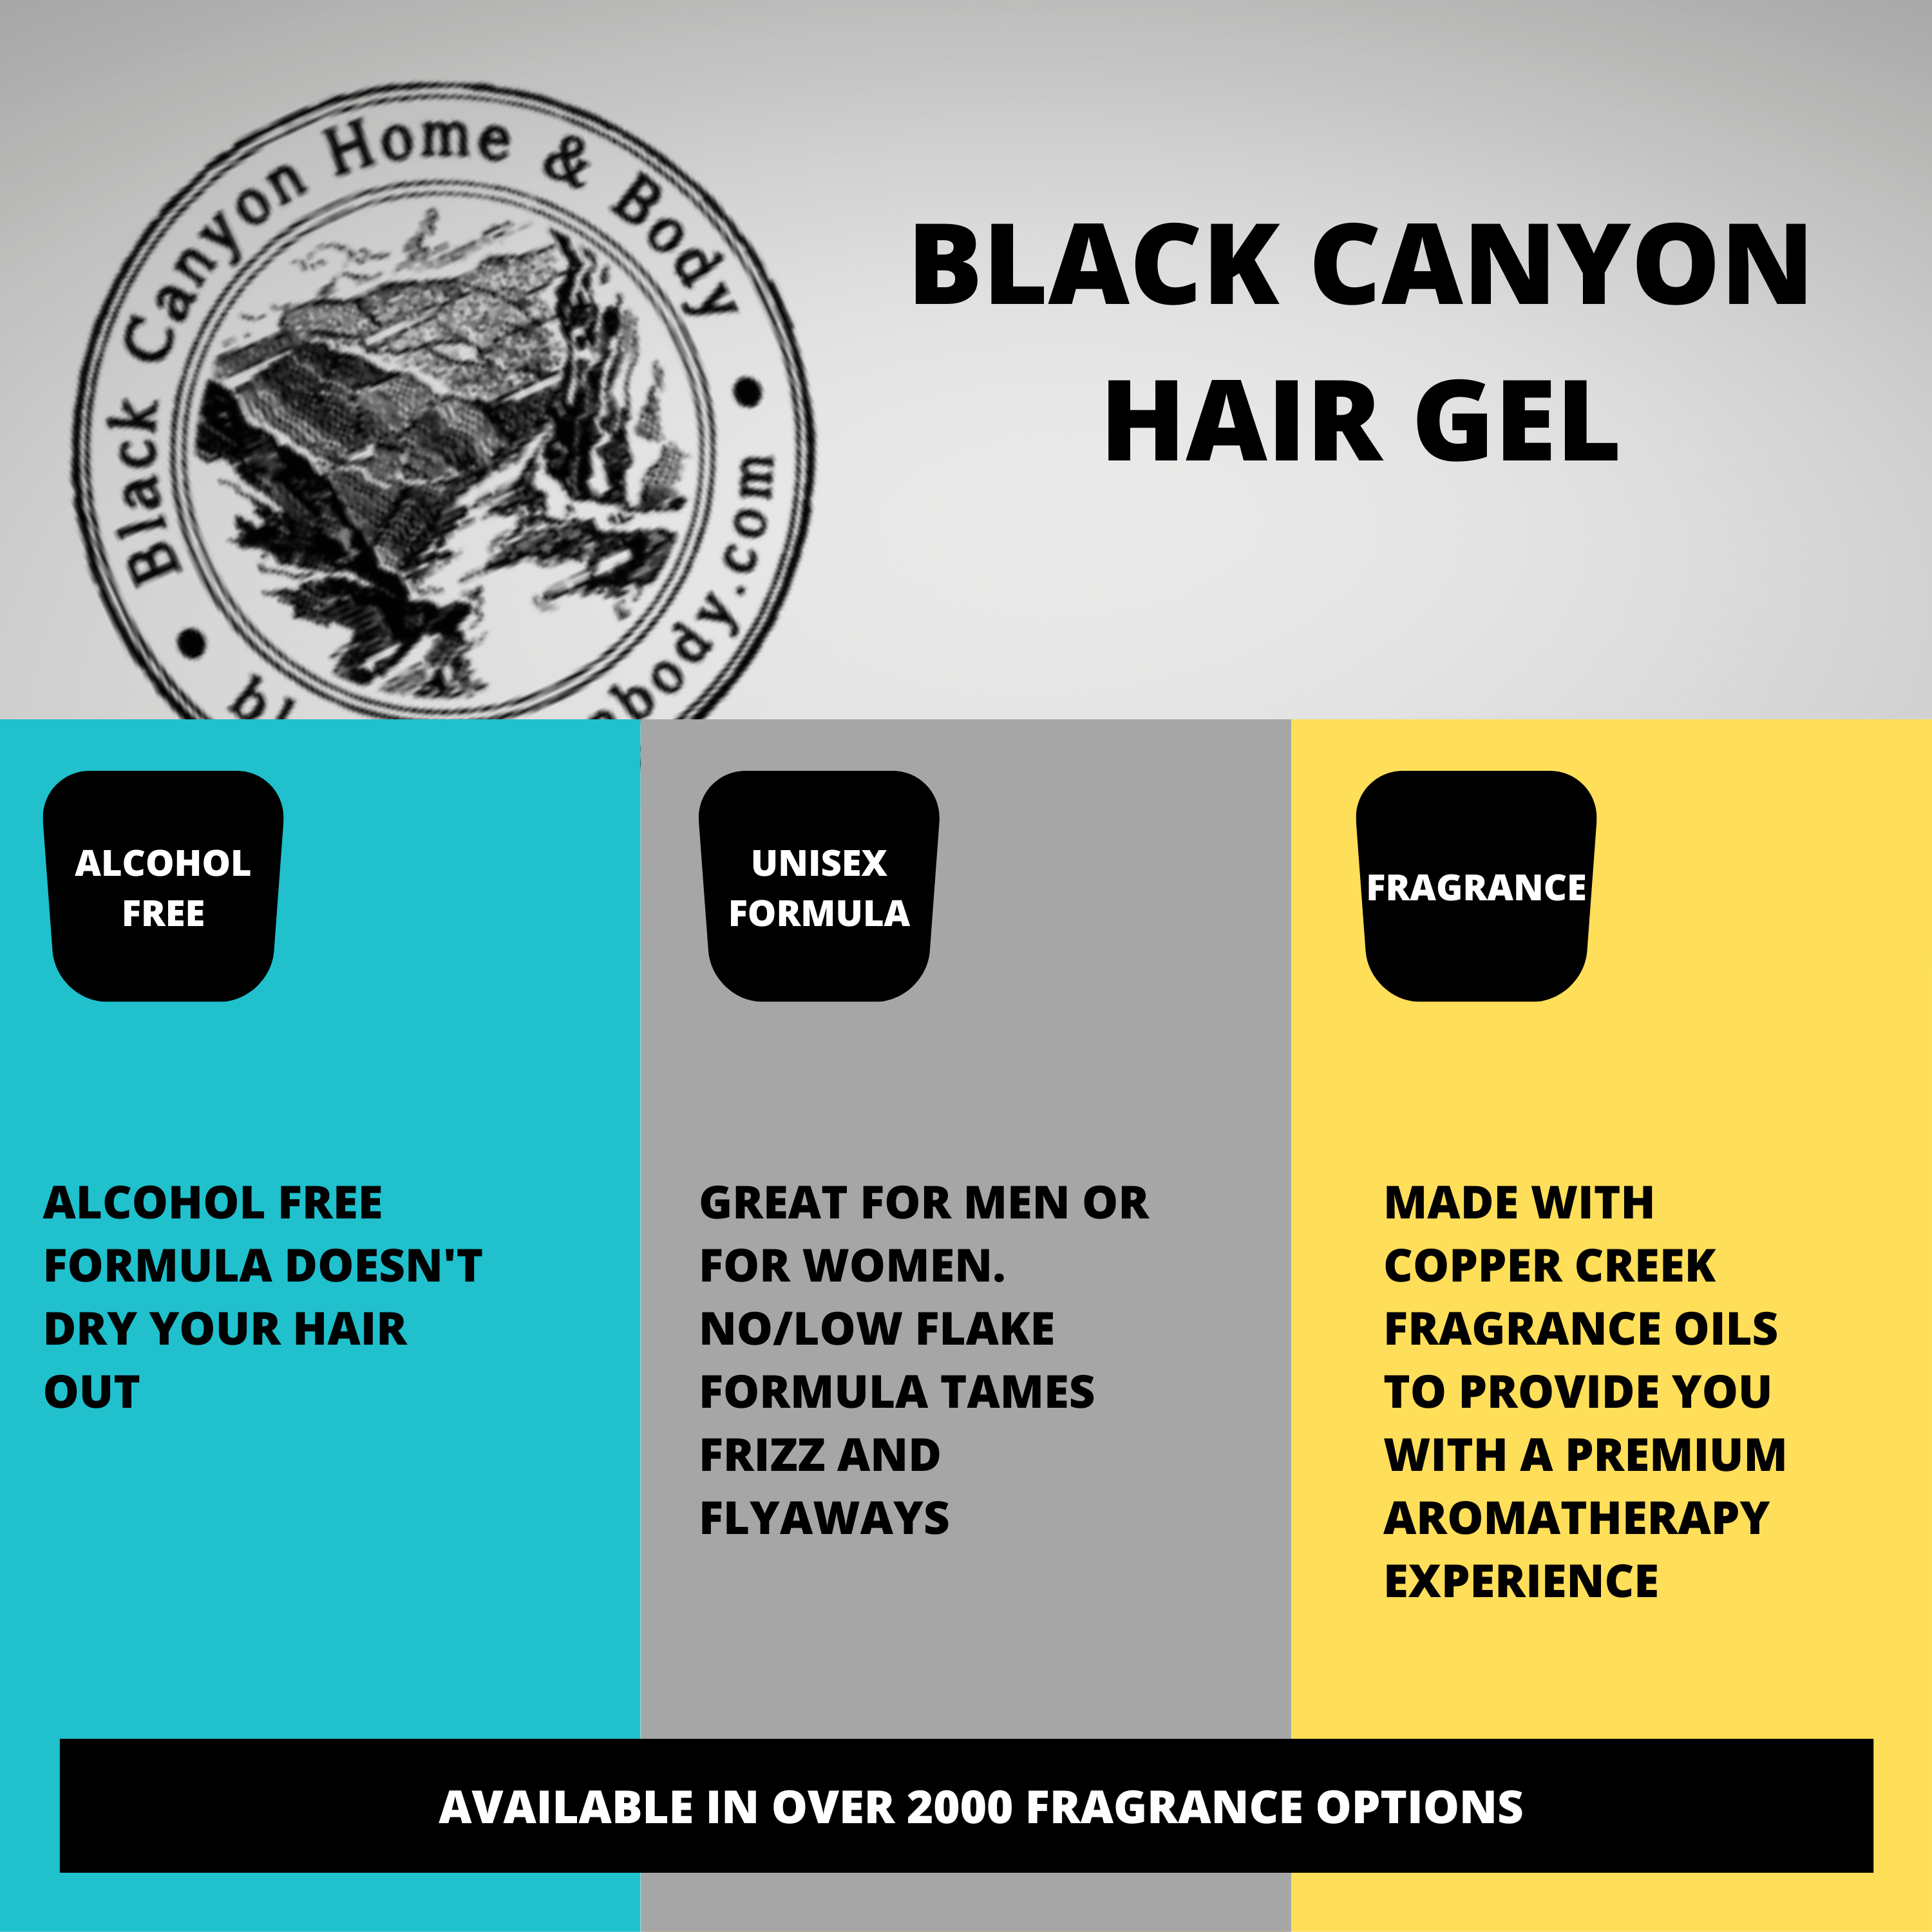 Black Canyon Easter Jelly Bean Scented Hair Gel